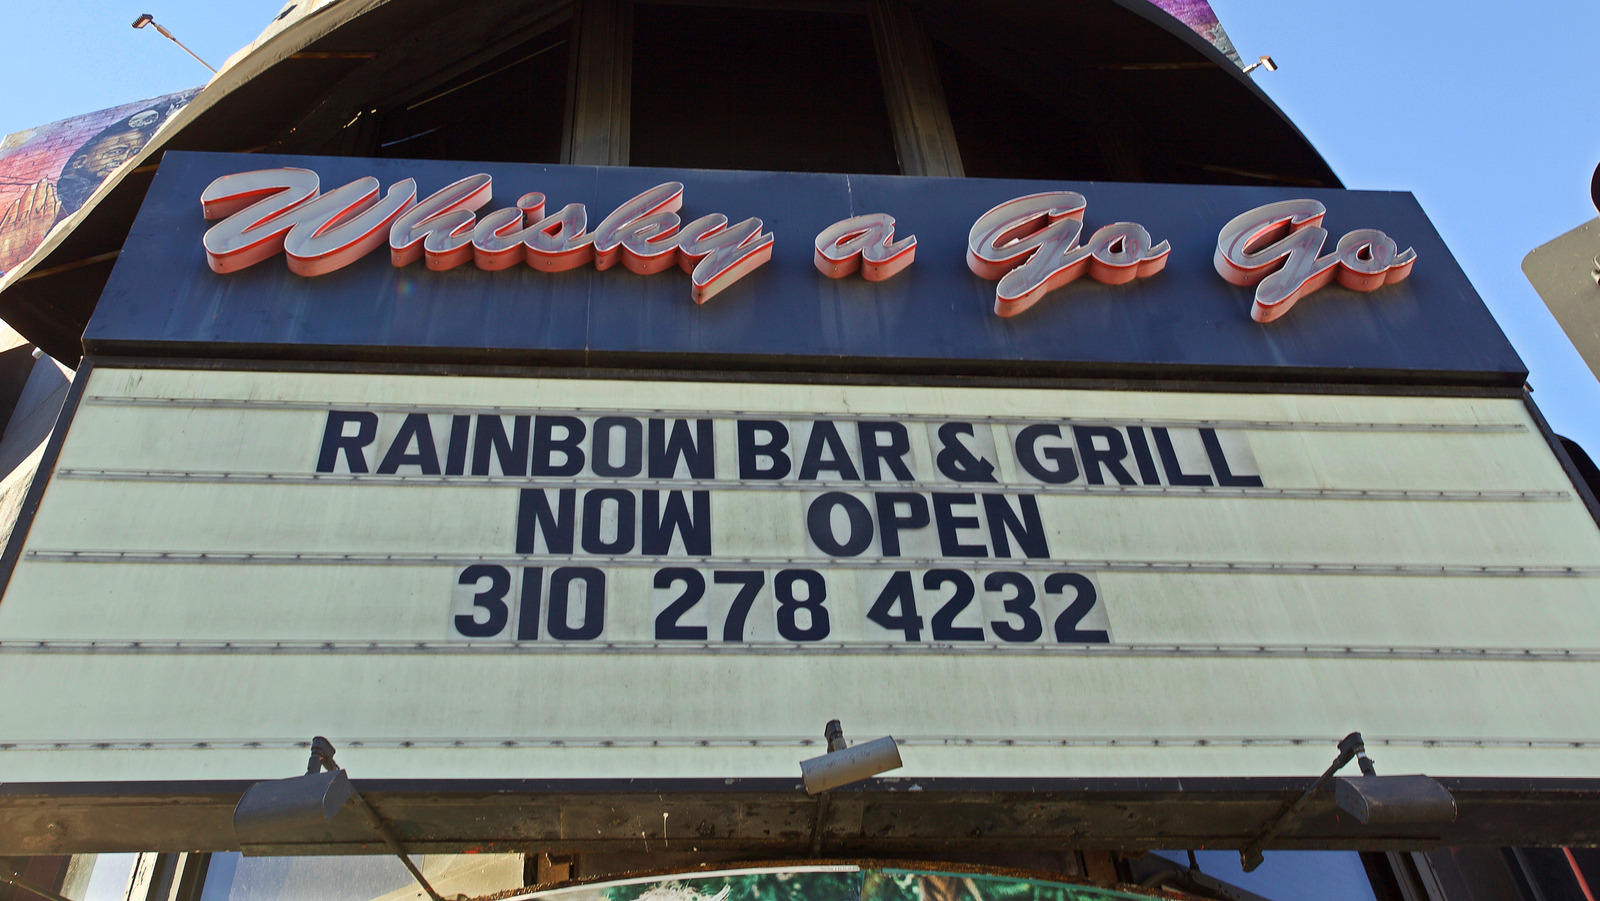 The Wild History Of The Iconic Whisky A Go Go – Grunge